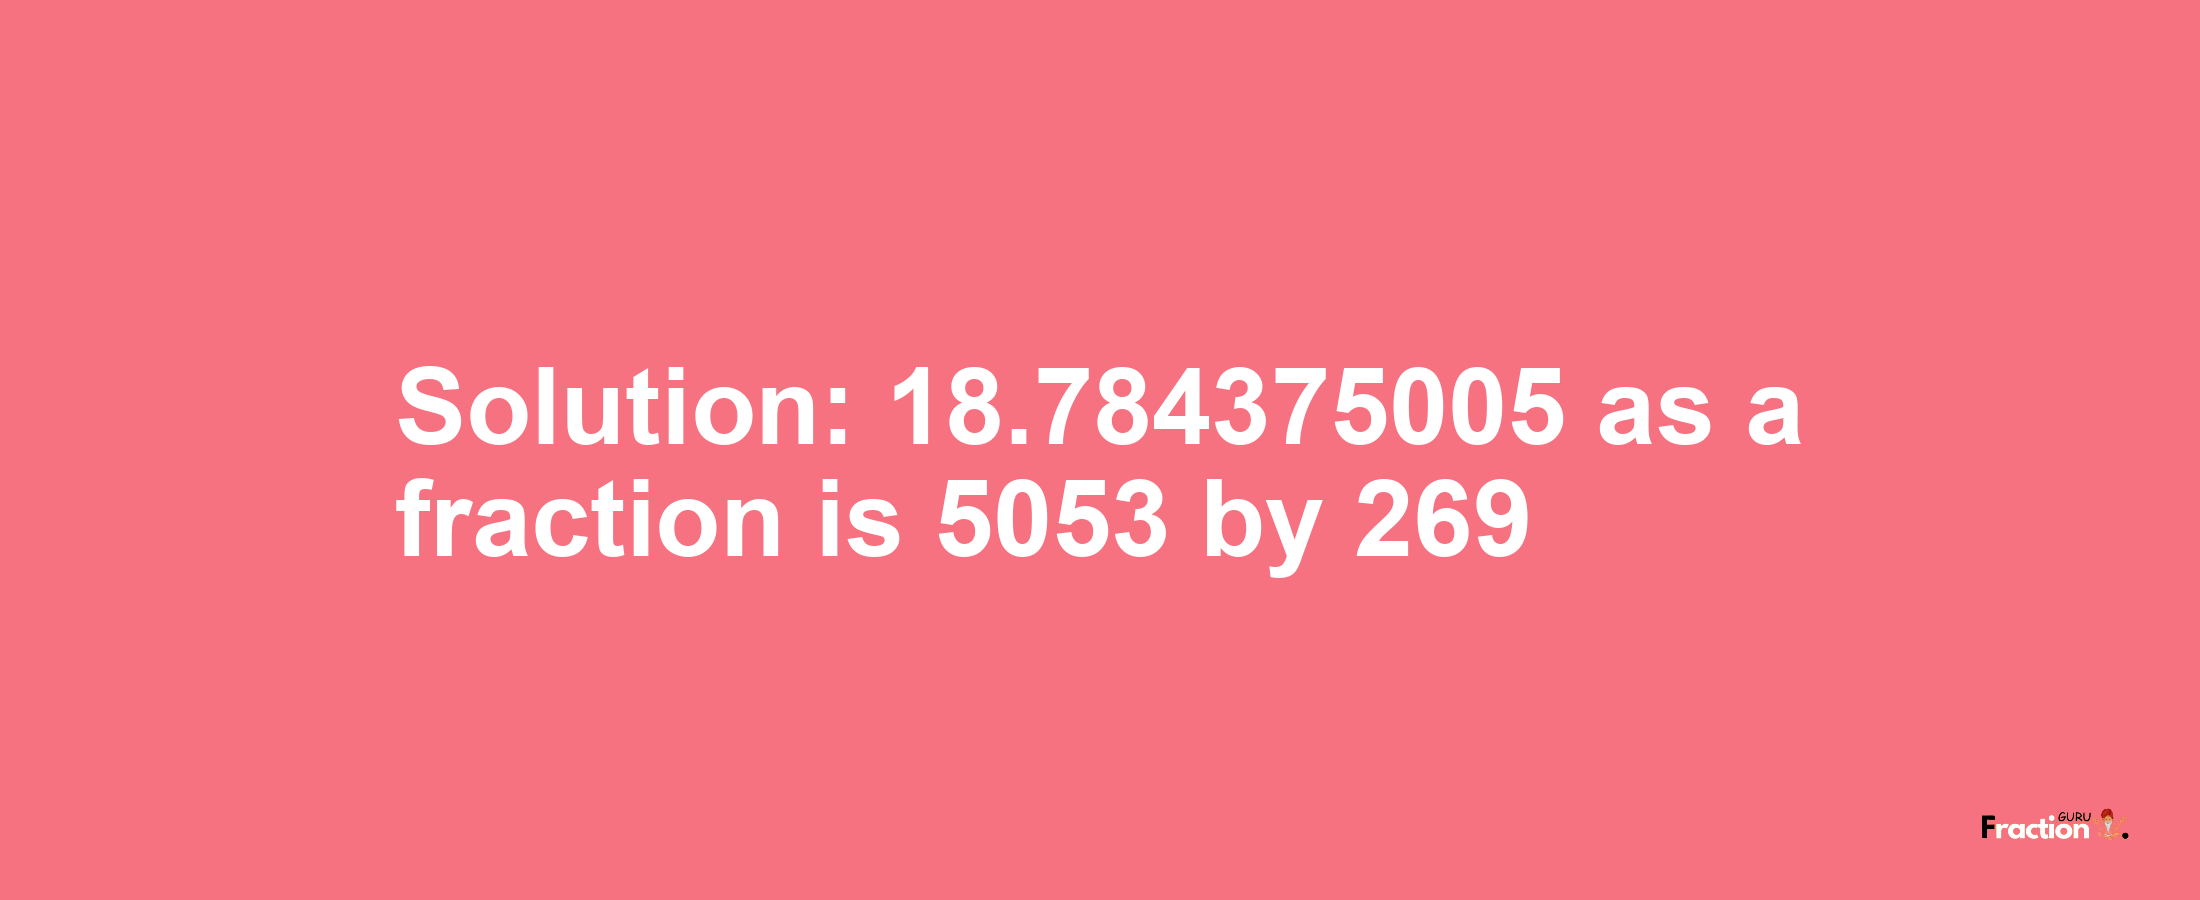 Solution:18.784375005 as a fraction is 5053/269